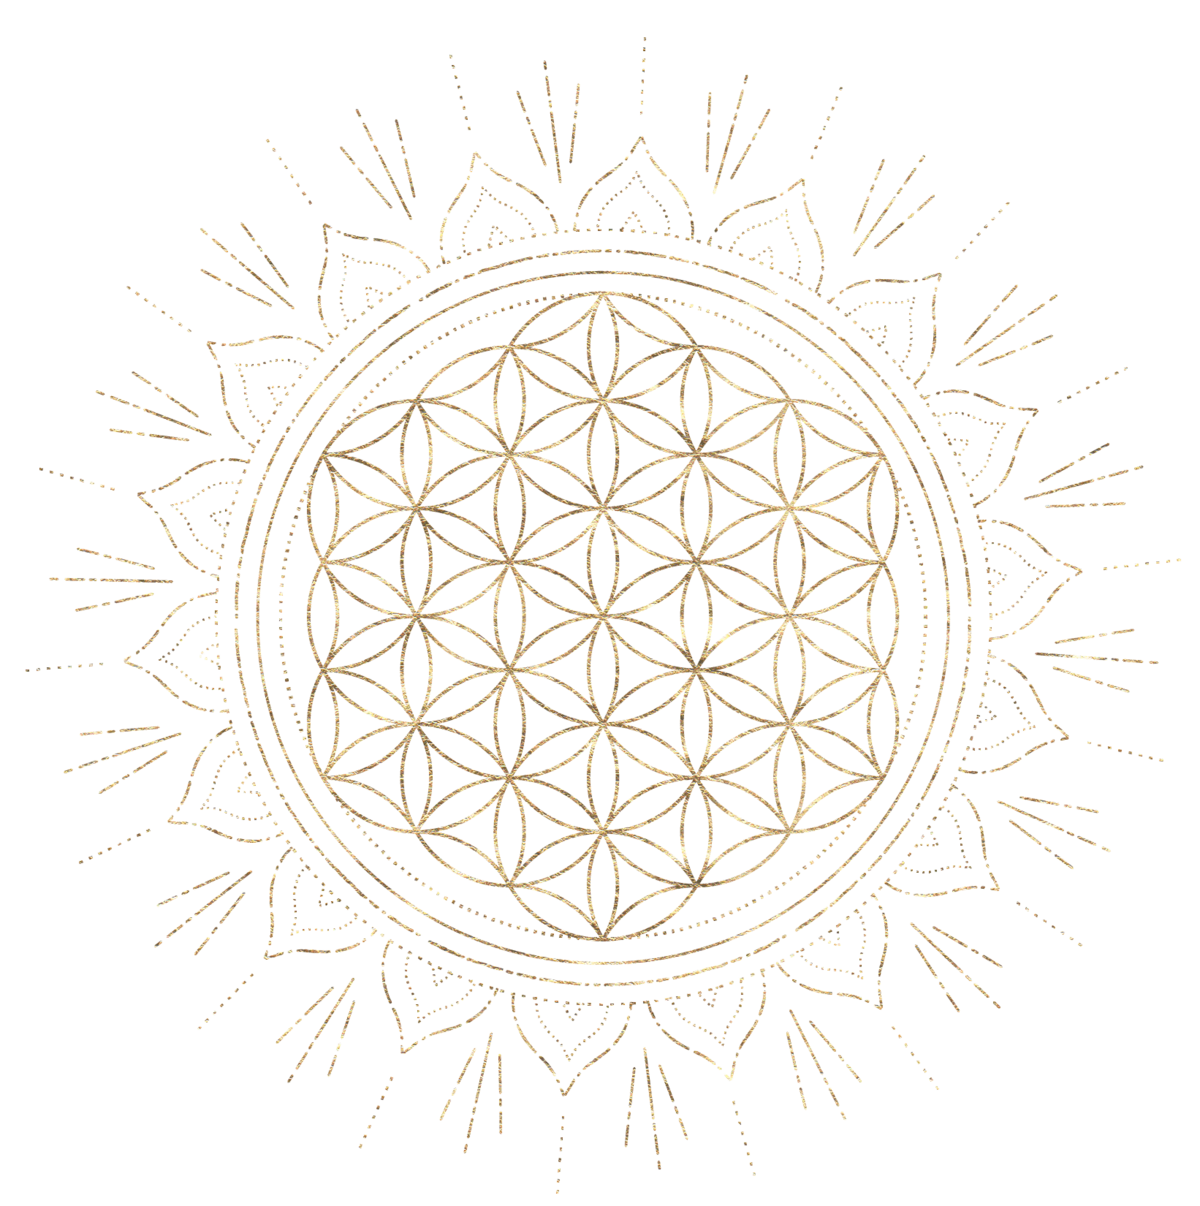 Flower of Life. We are all interconnected. I believe you found our community for a reason. You are invited to join us inside the Conscious Living Circle Online Community created by Sara Monk.